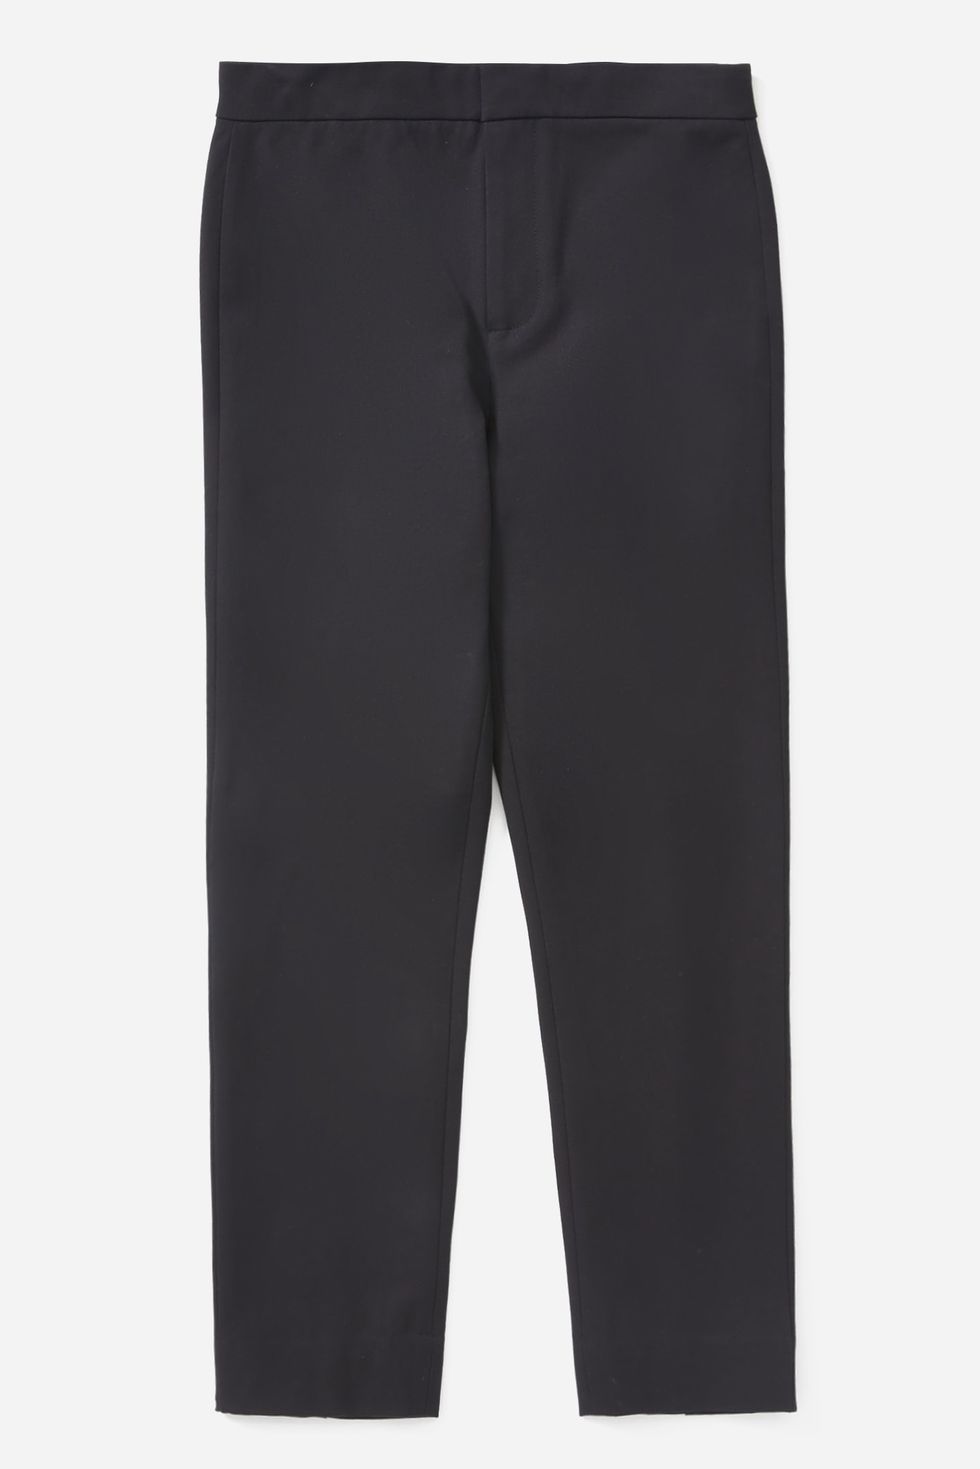 The Fixed Waist Work Pant